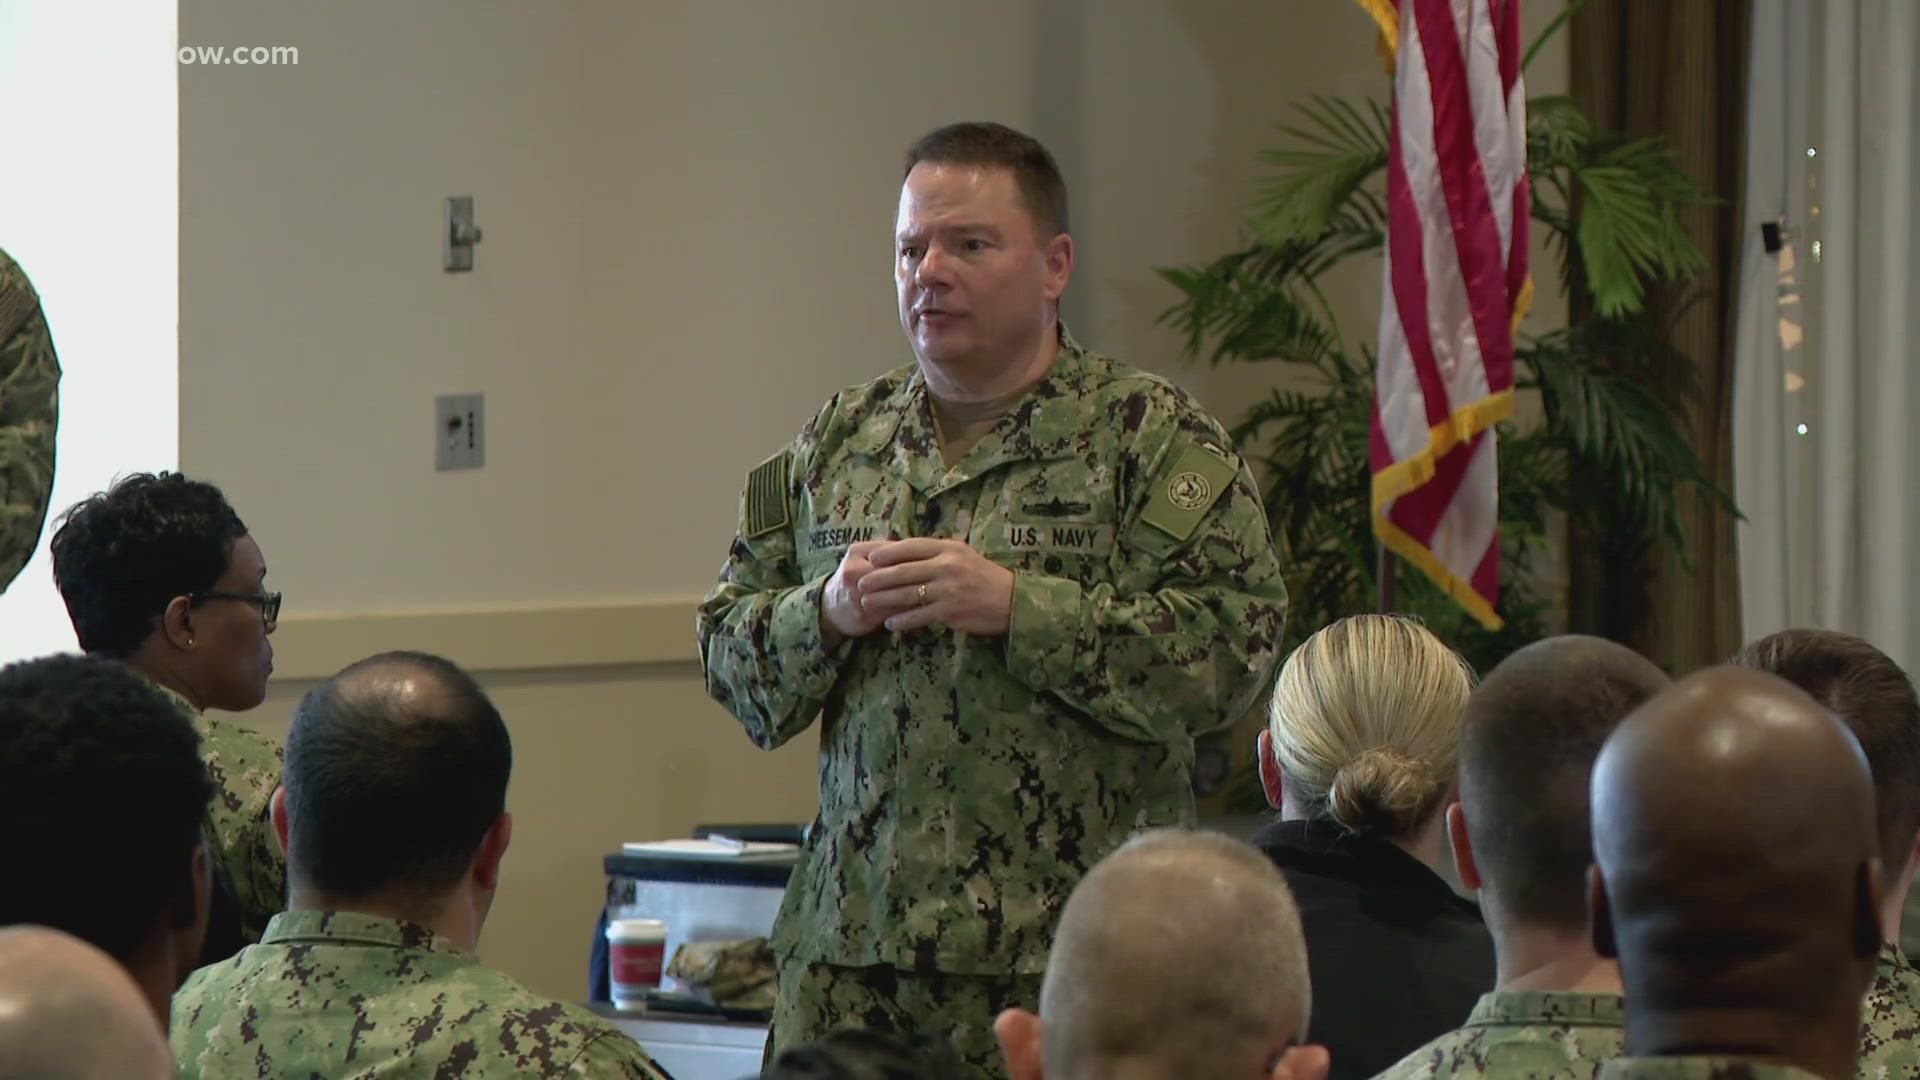 Chief of Naval Personnel, Vice Admiral Rick Cheeseman, was at Naval Station Norfolk Thursday, holding an "all-hands call" with more than 350 sailors.